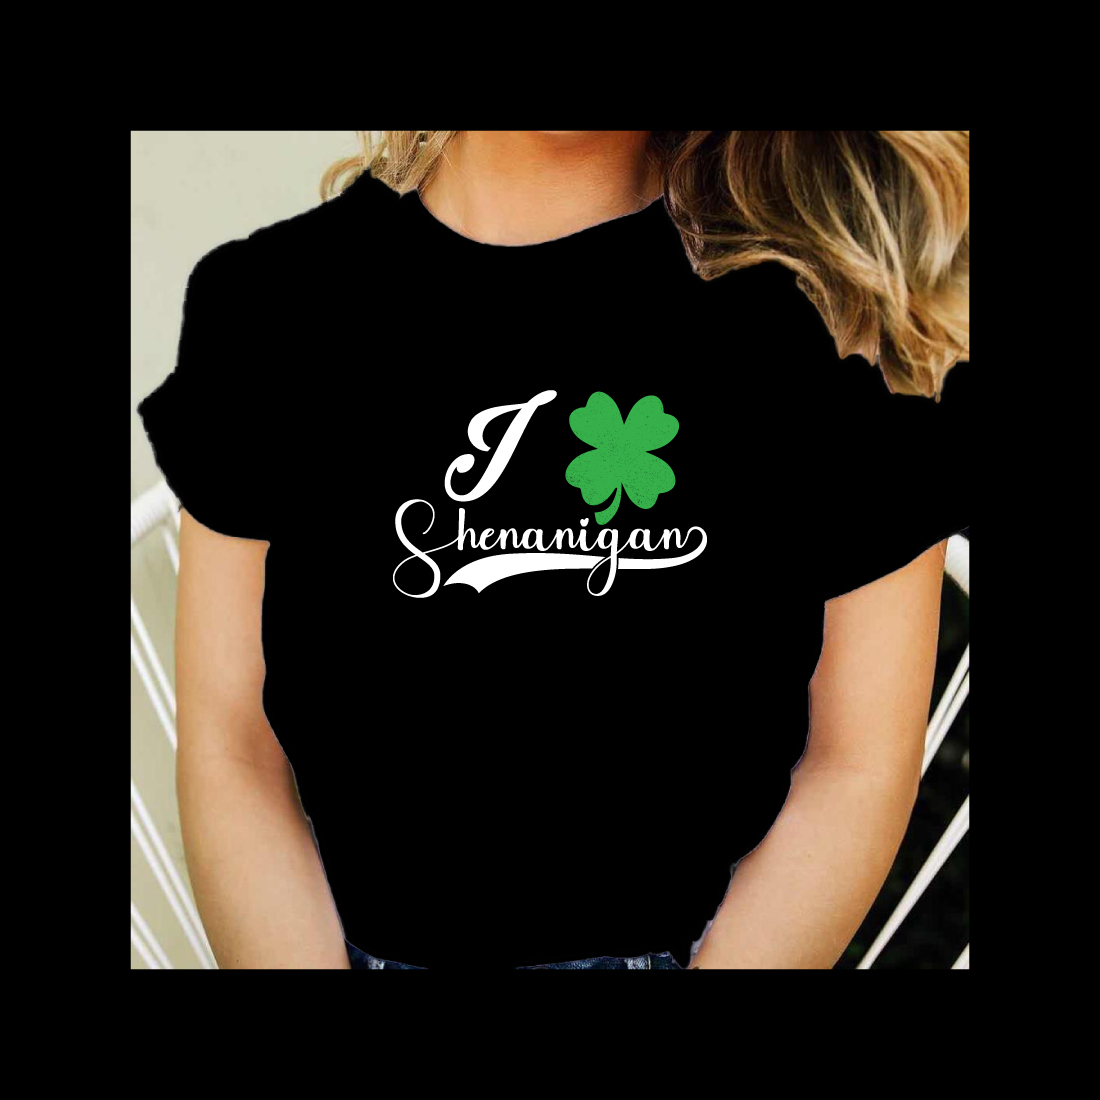 Woman wearing a black shirt with a shamrock on it.